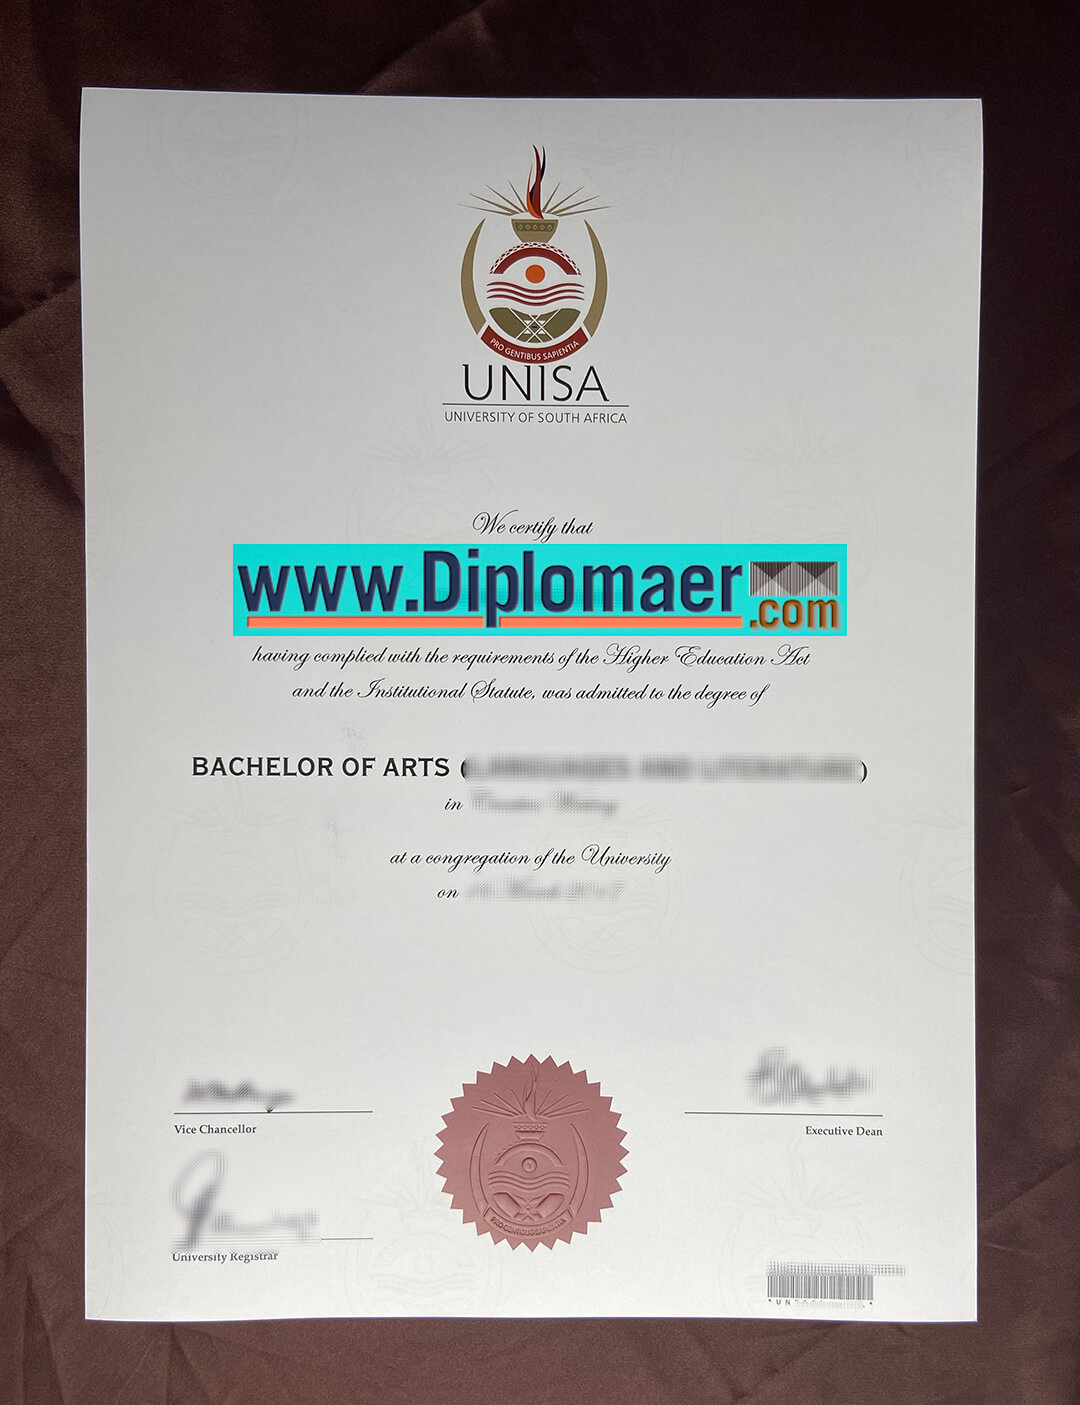 University of South Africa Fake Diploma - Where to obtain a replacement for the University of South Africa diploma?